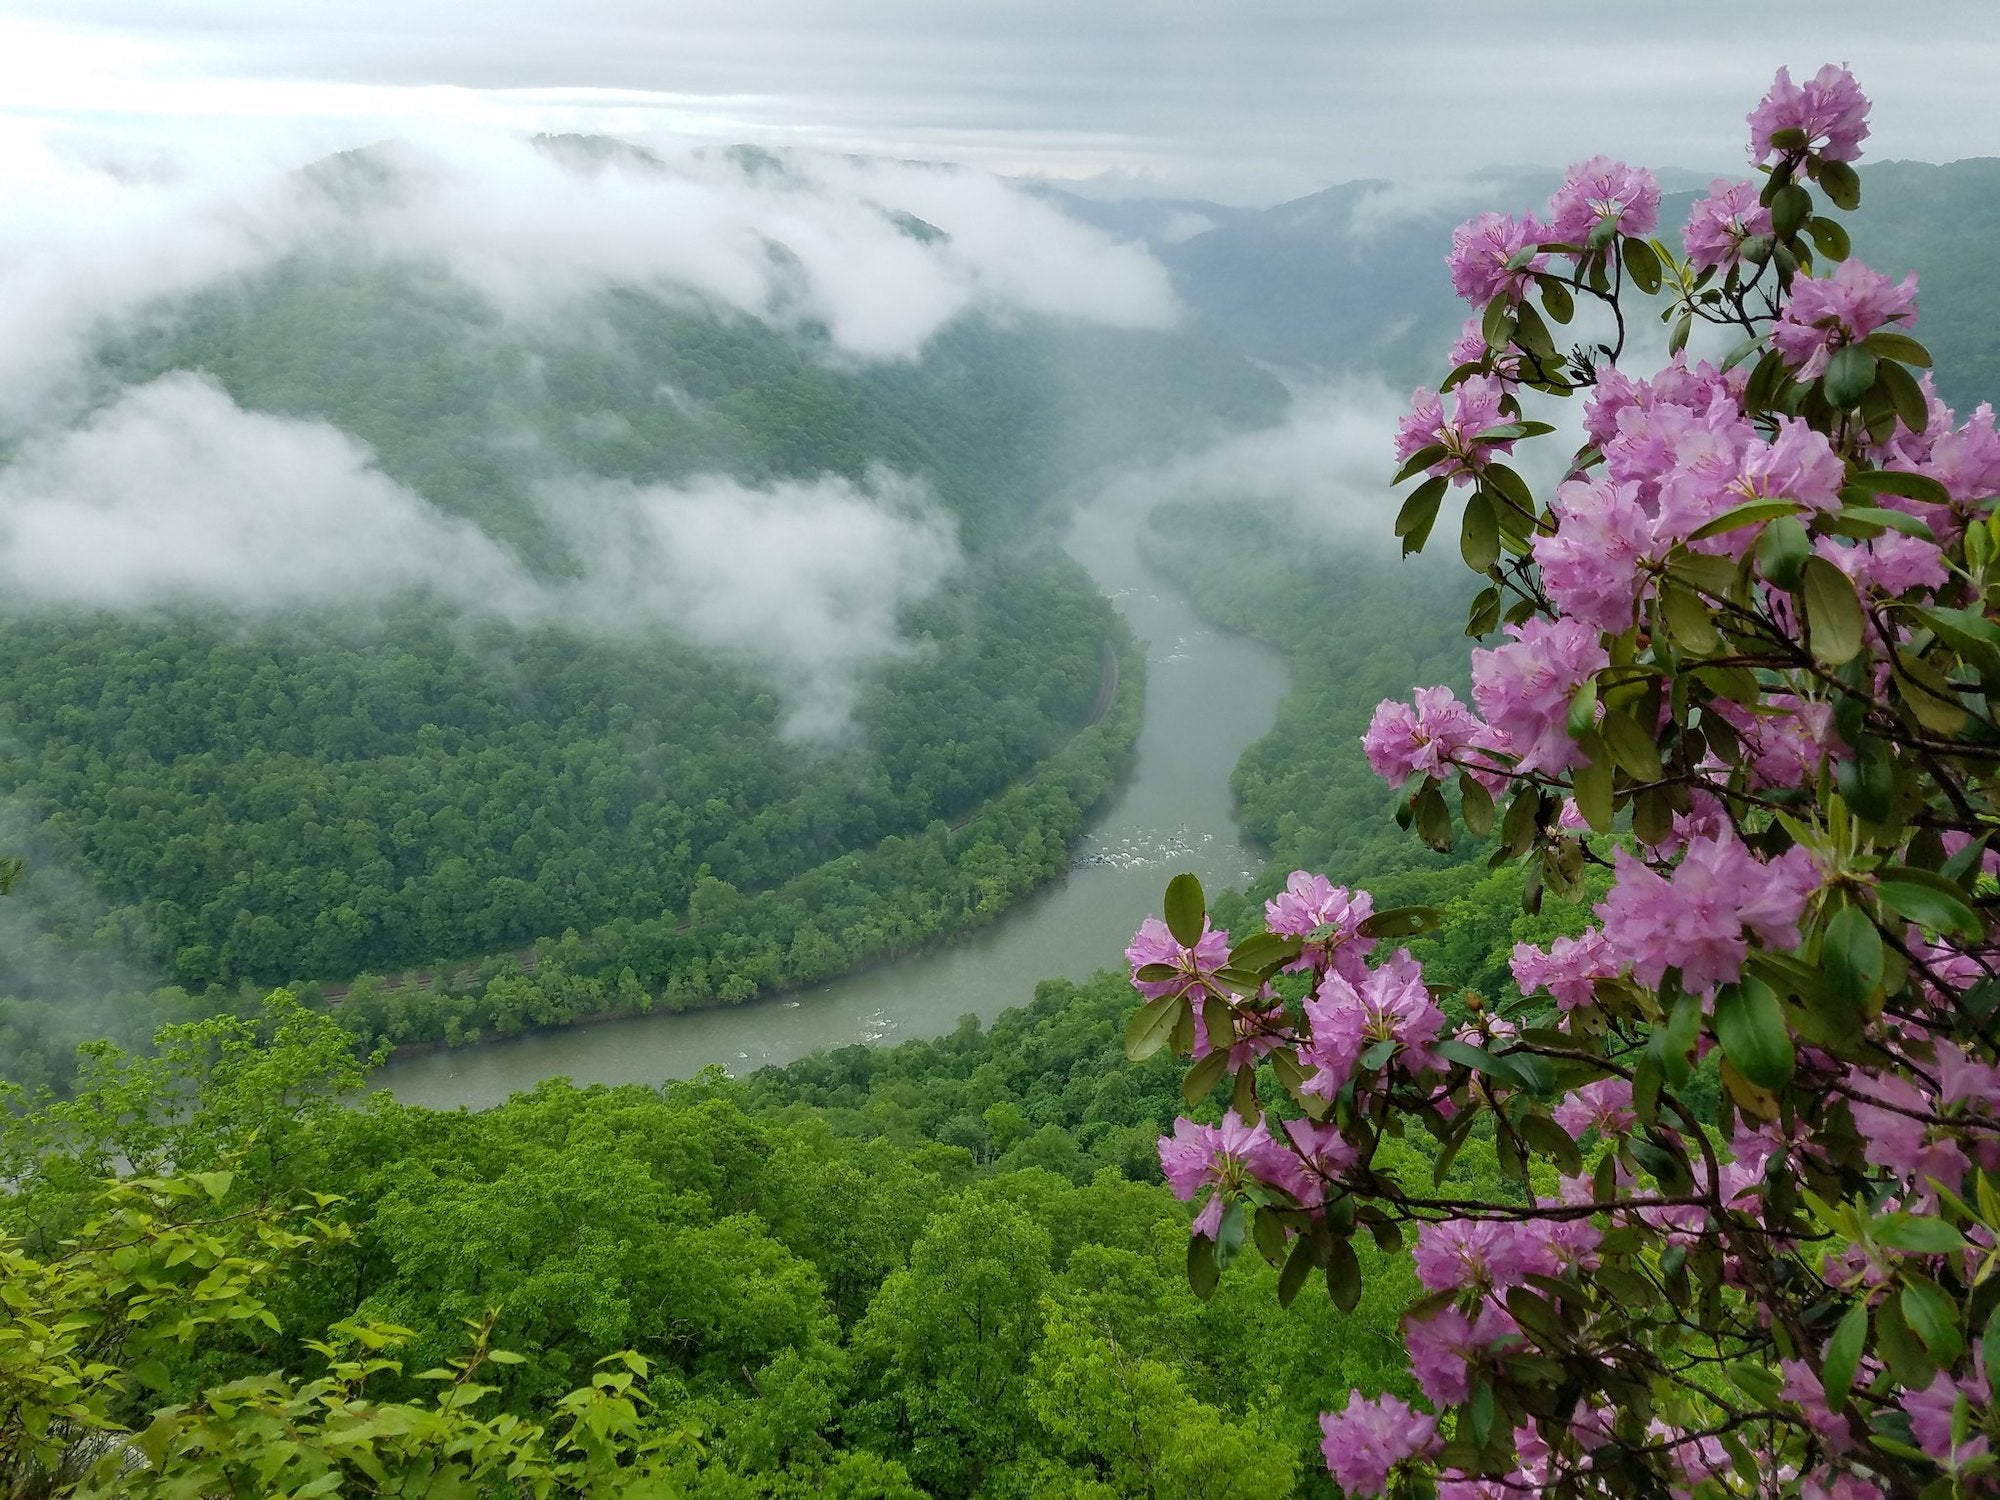 A purple Catawba rhododendron blooming in New River Gorge National Park in West Virginia.